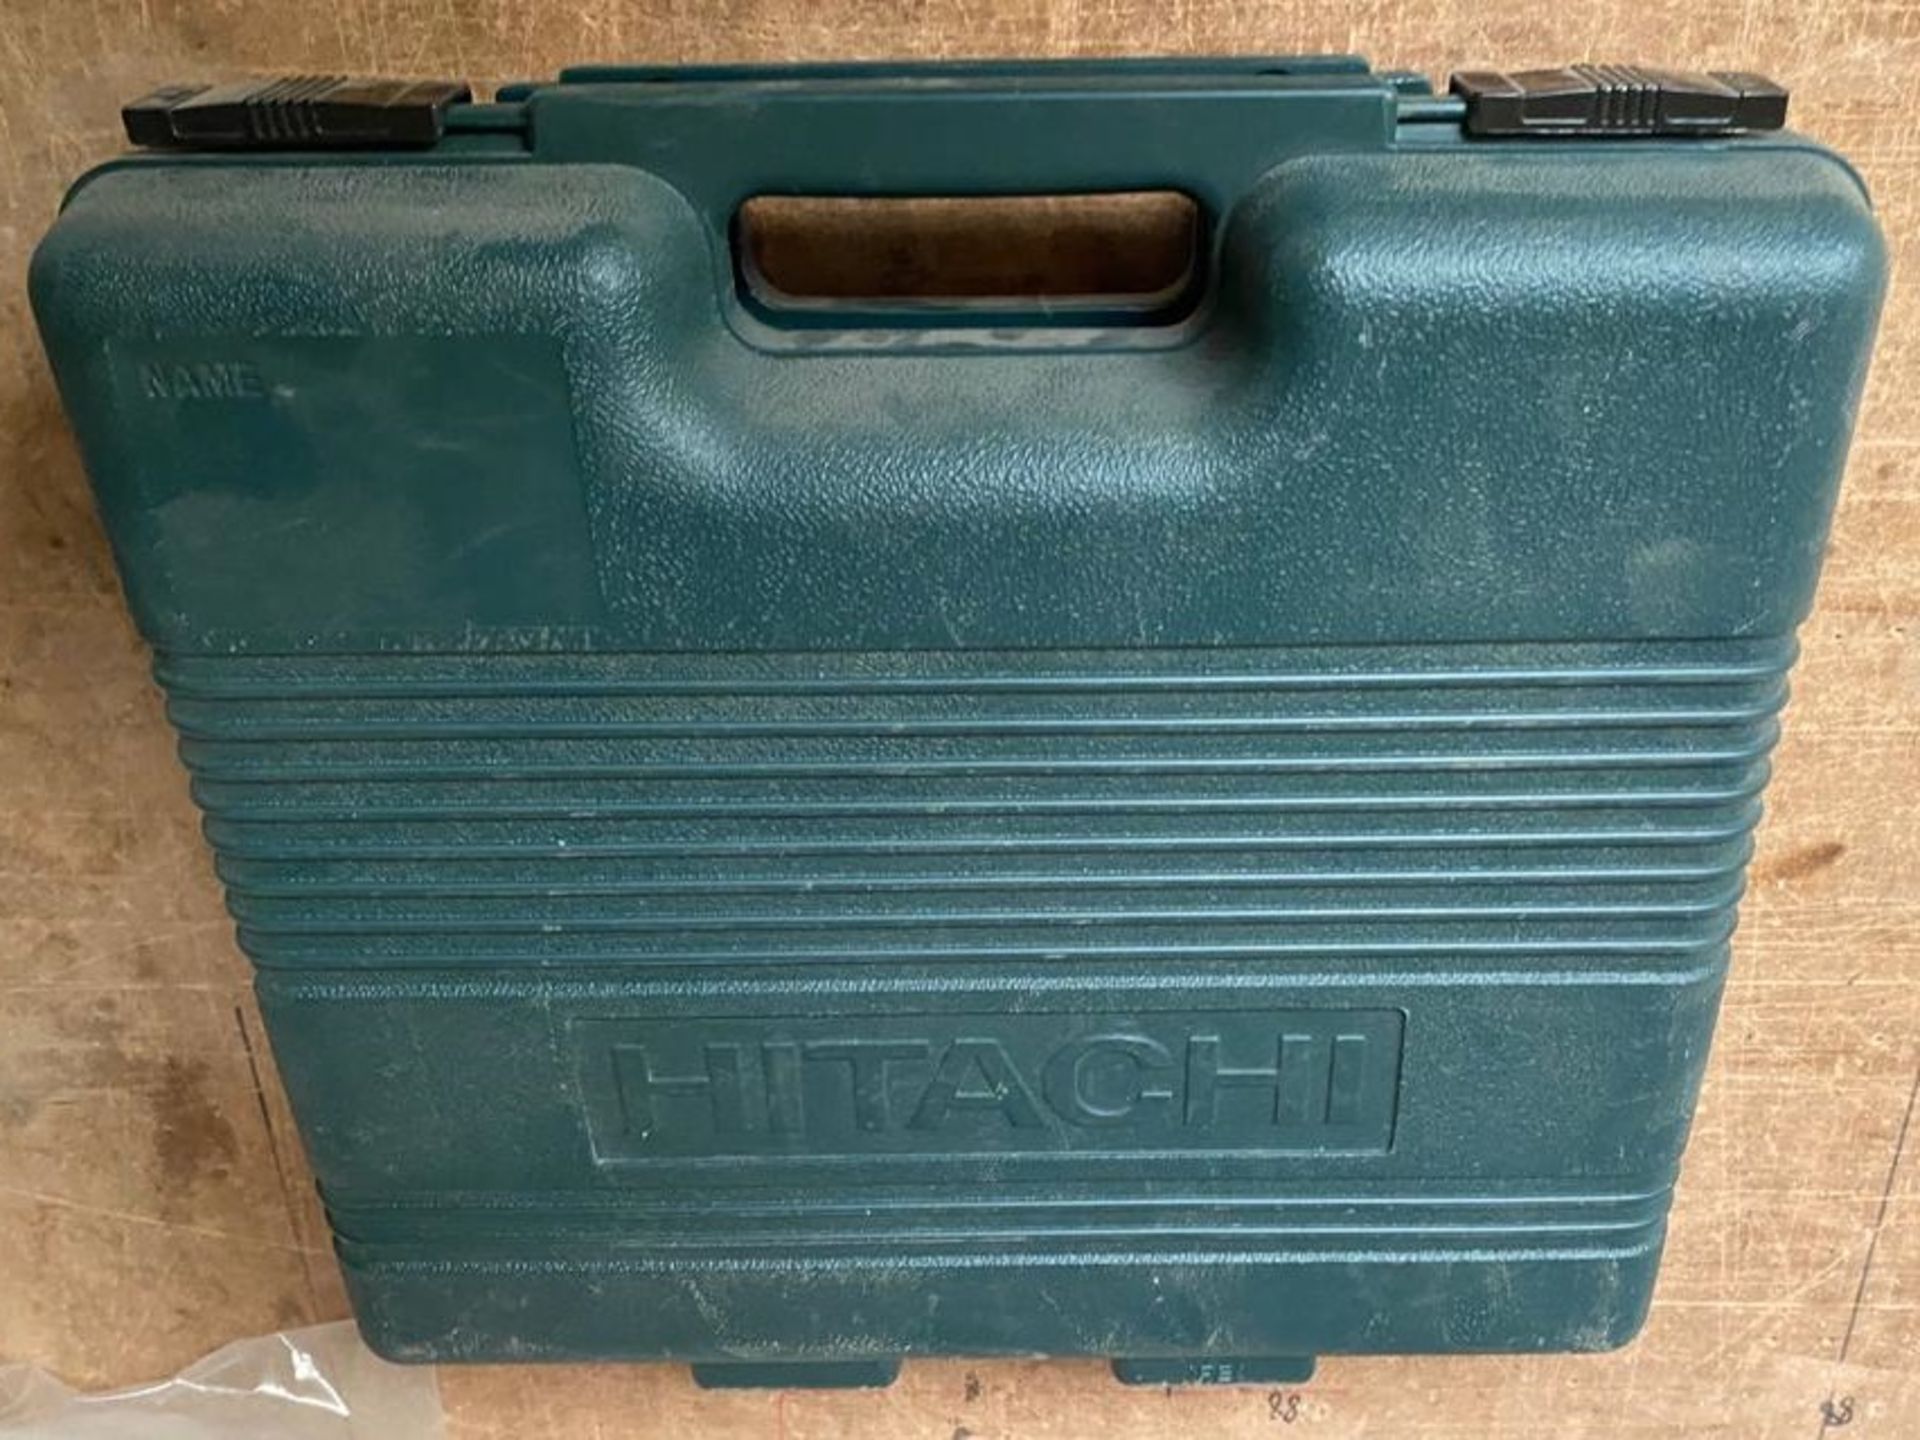 1 x Hitachi Variable Speed Jigsaw With Carry Case - 240v - Image 2 of 3